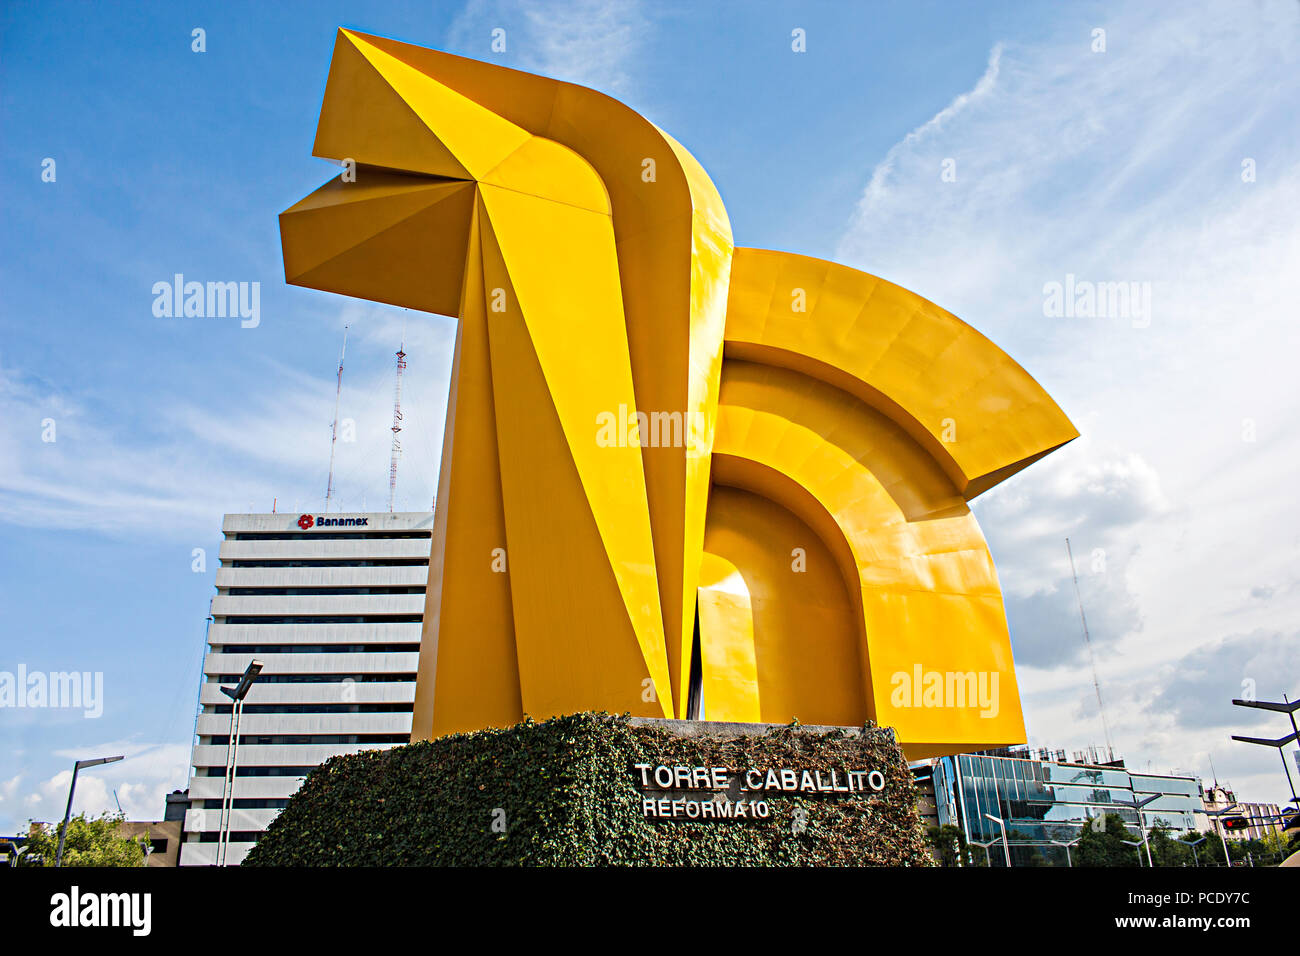 El Caballito Monument, Placed on Reforma street #10 at Mexico City. Stock Photo